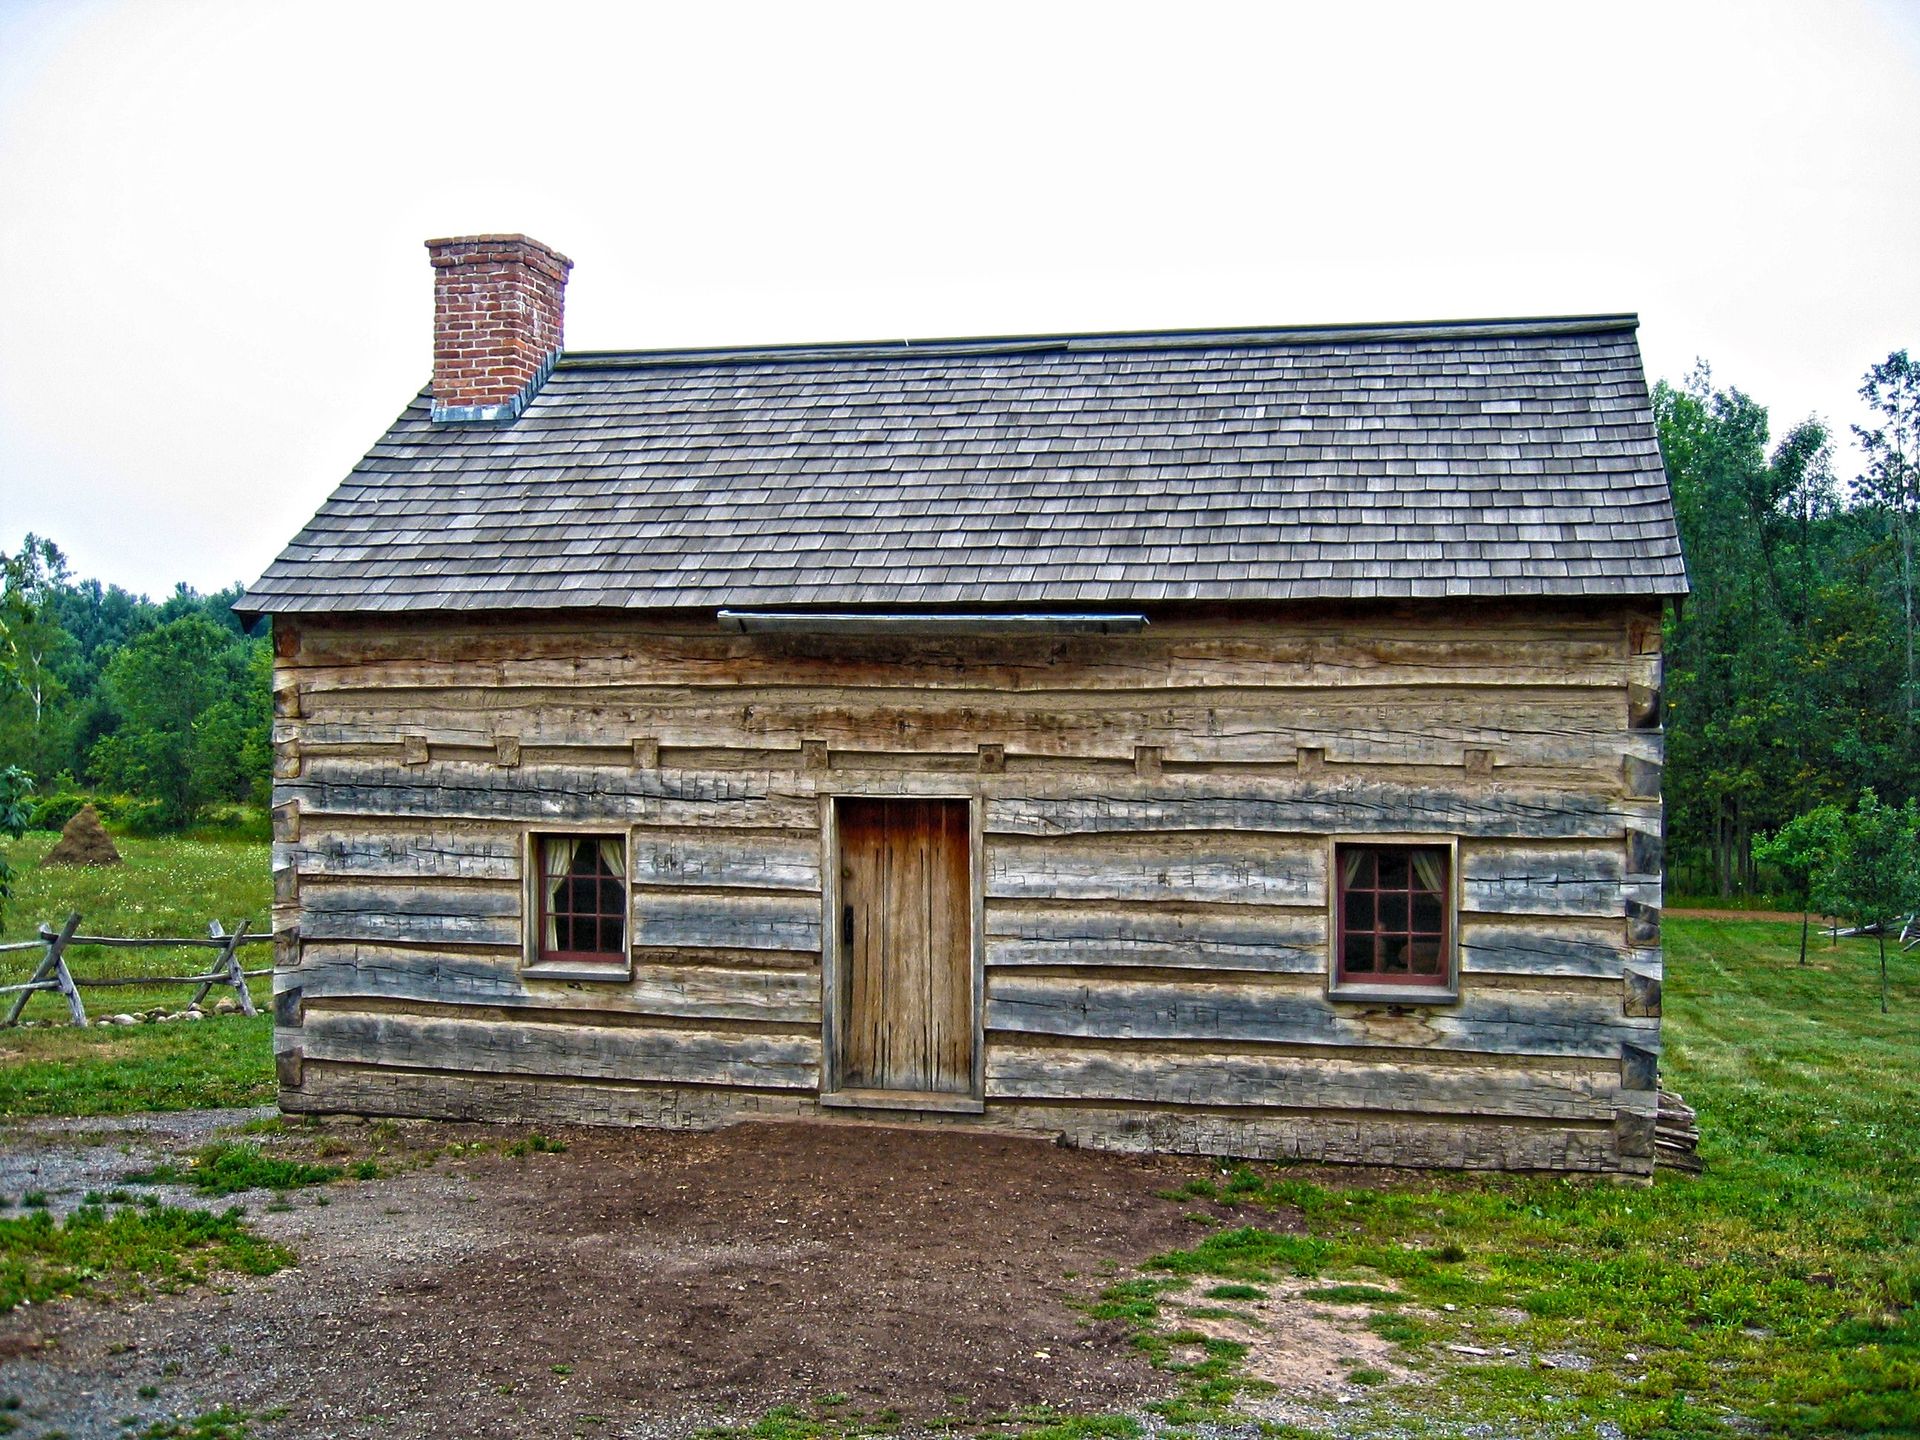 An exterior view of Joseph Smith’s family home in Palmyra, New York.